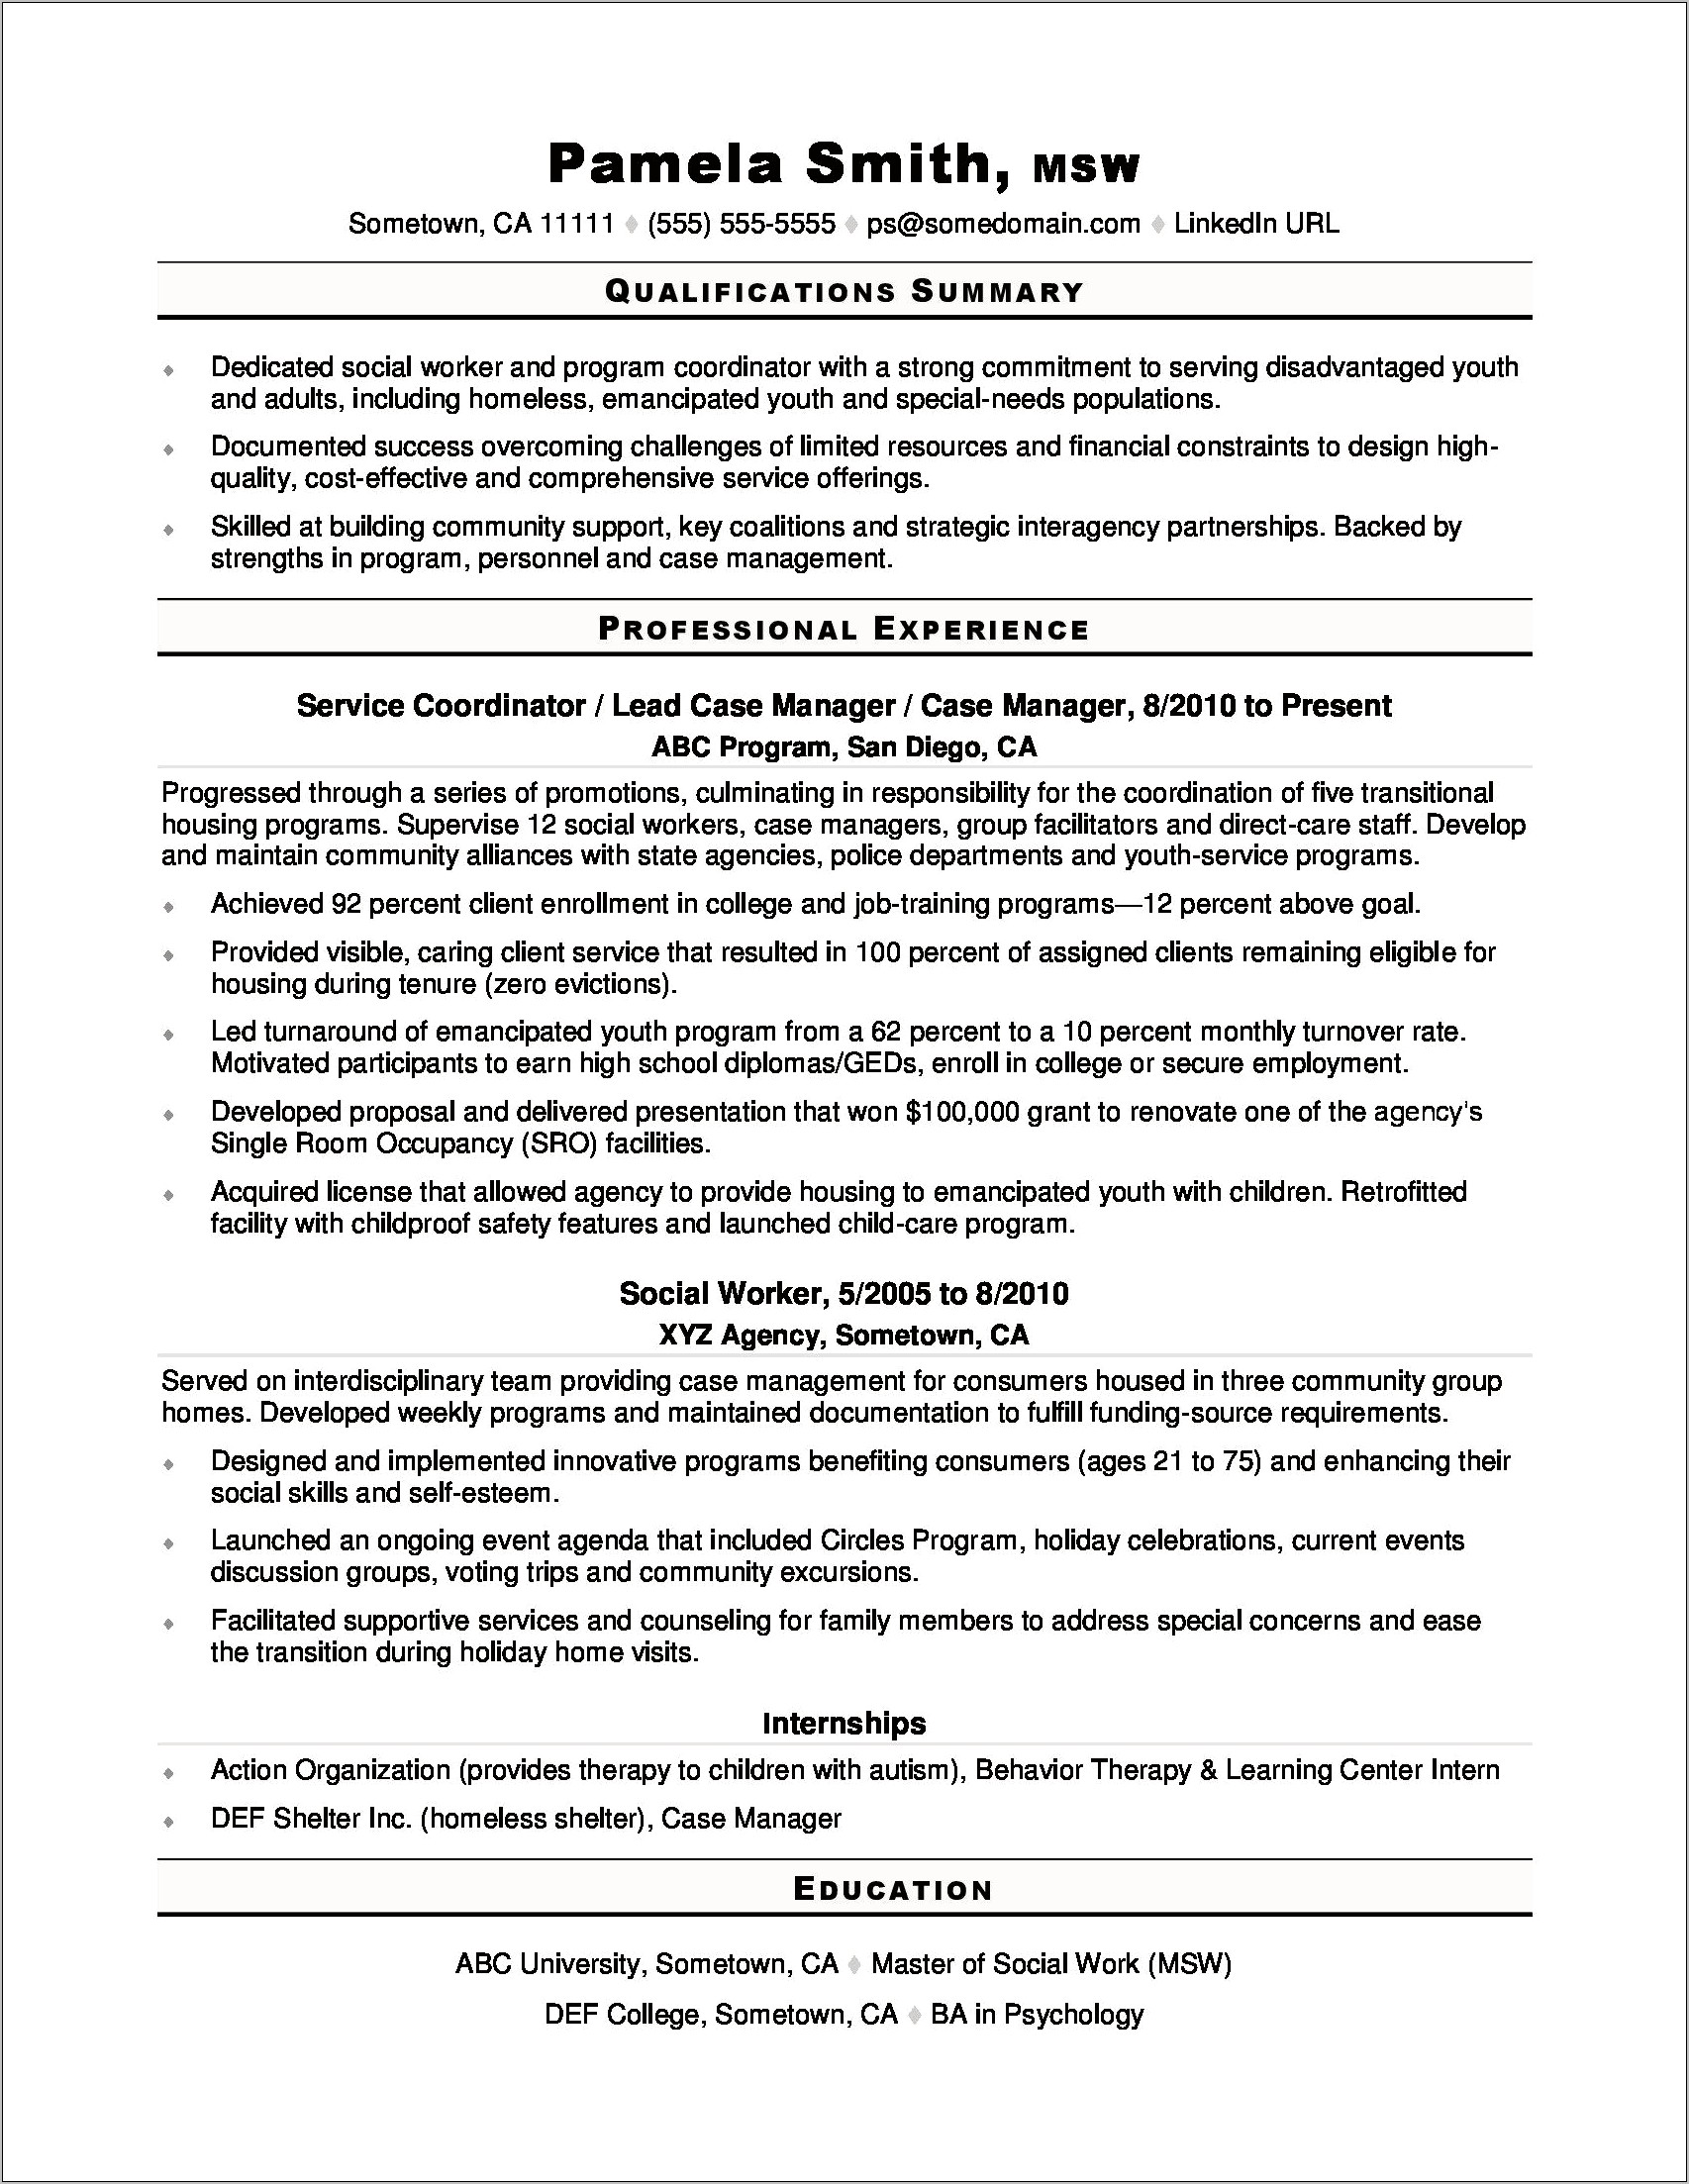 Resume Summary Examples Residential Counselor